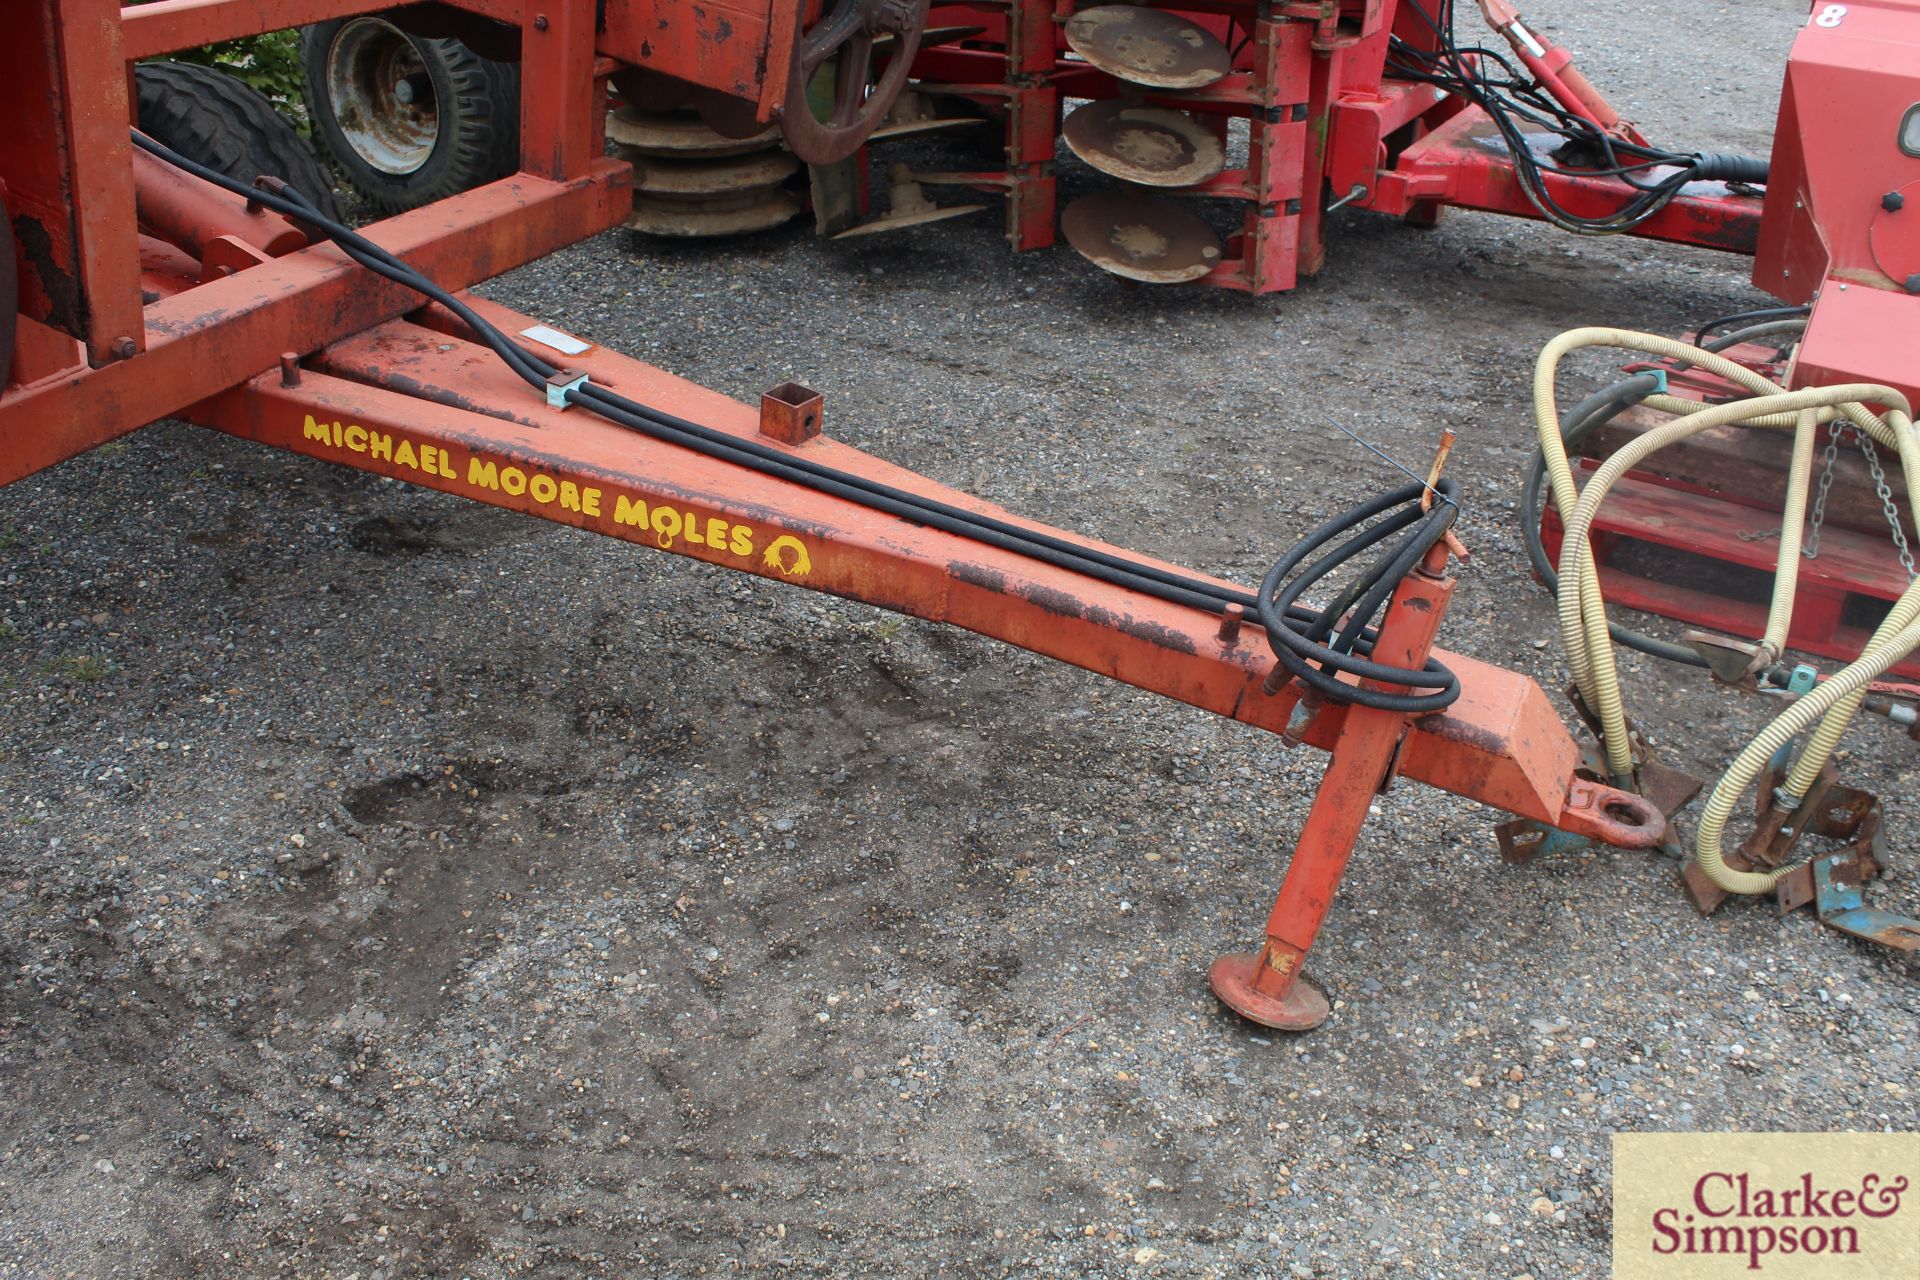 Michael Moore Moles 4m double press. 1997. Serial number 968. Owned from new. - Image 3 of 9